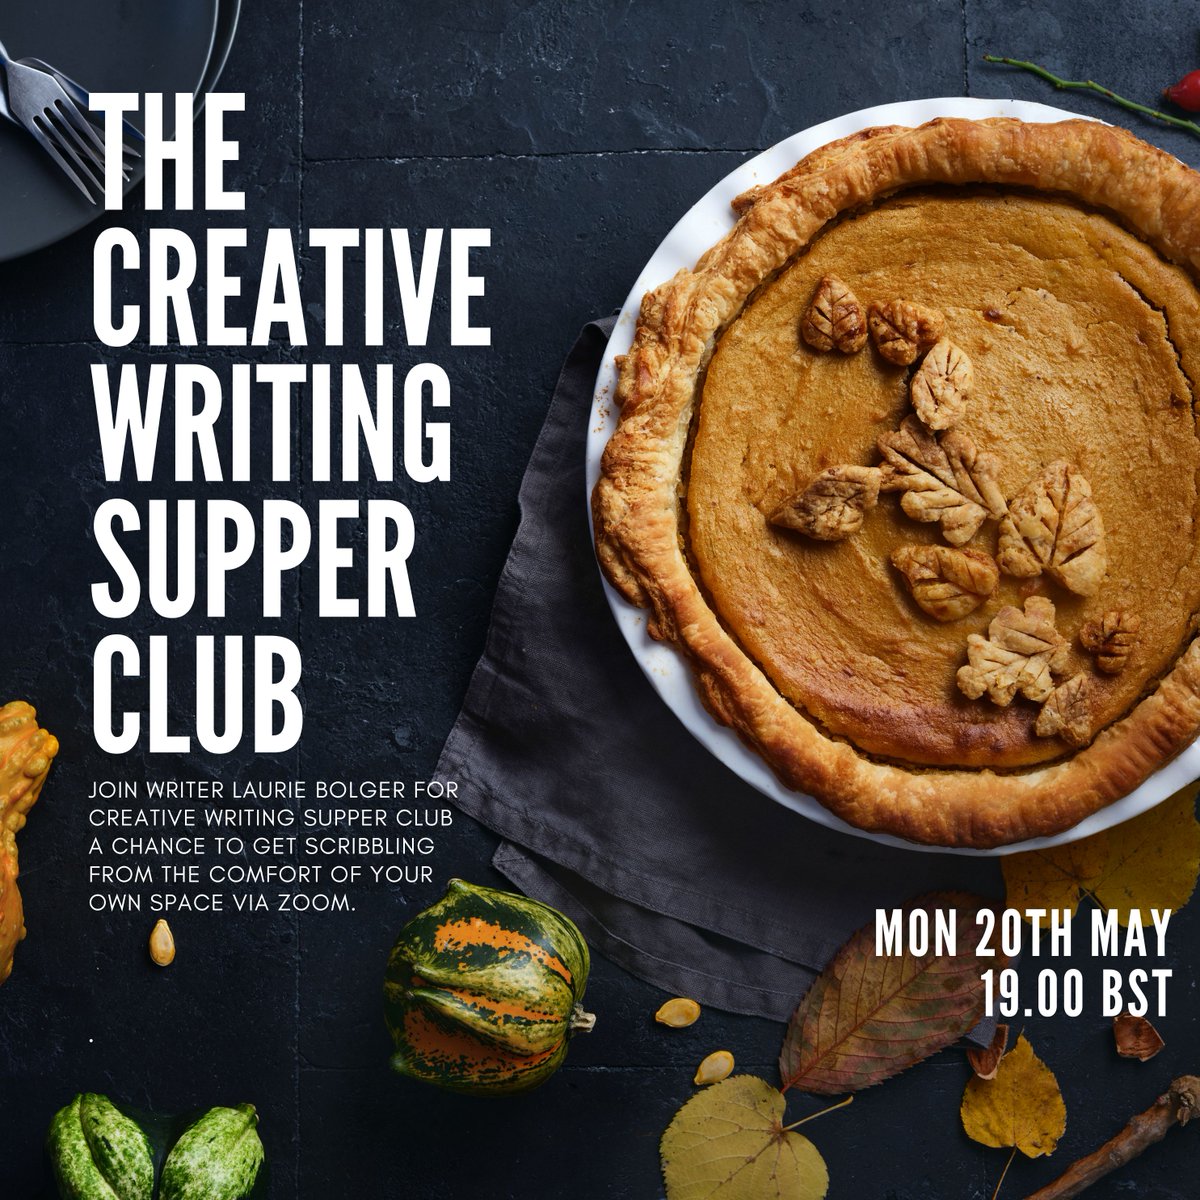 TONIGHT! The Creative Writing Supper Club...let's do this! …ivewritingsupperclub.eventbrite.co.uk Bring ya supper of choice or even a cuppa will do! Let's Eat Share Scribble. 🍽️💕🍴✍️ #writingworkshop #writingcommunity #writing #writingtime #writers #creativity #poetry